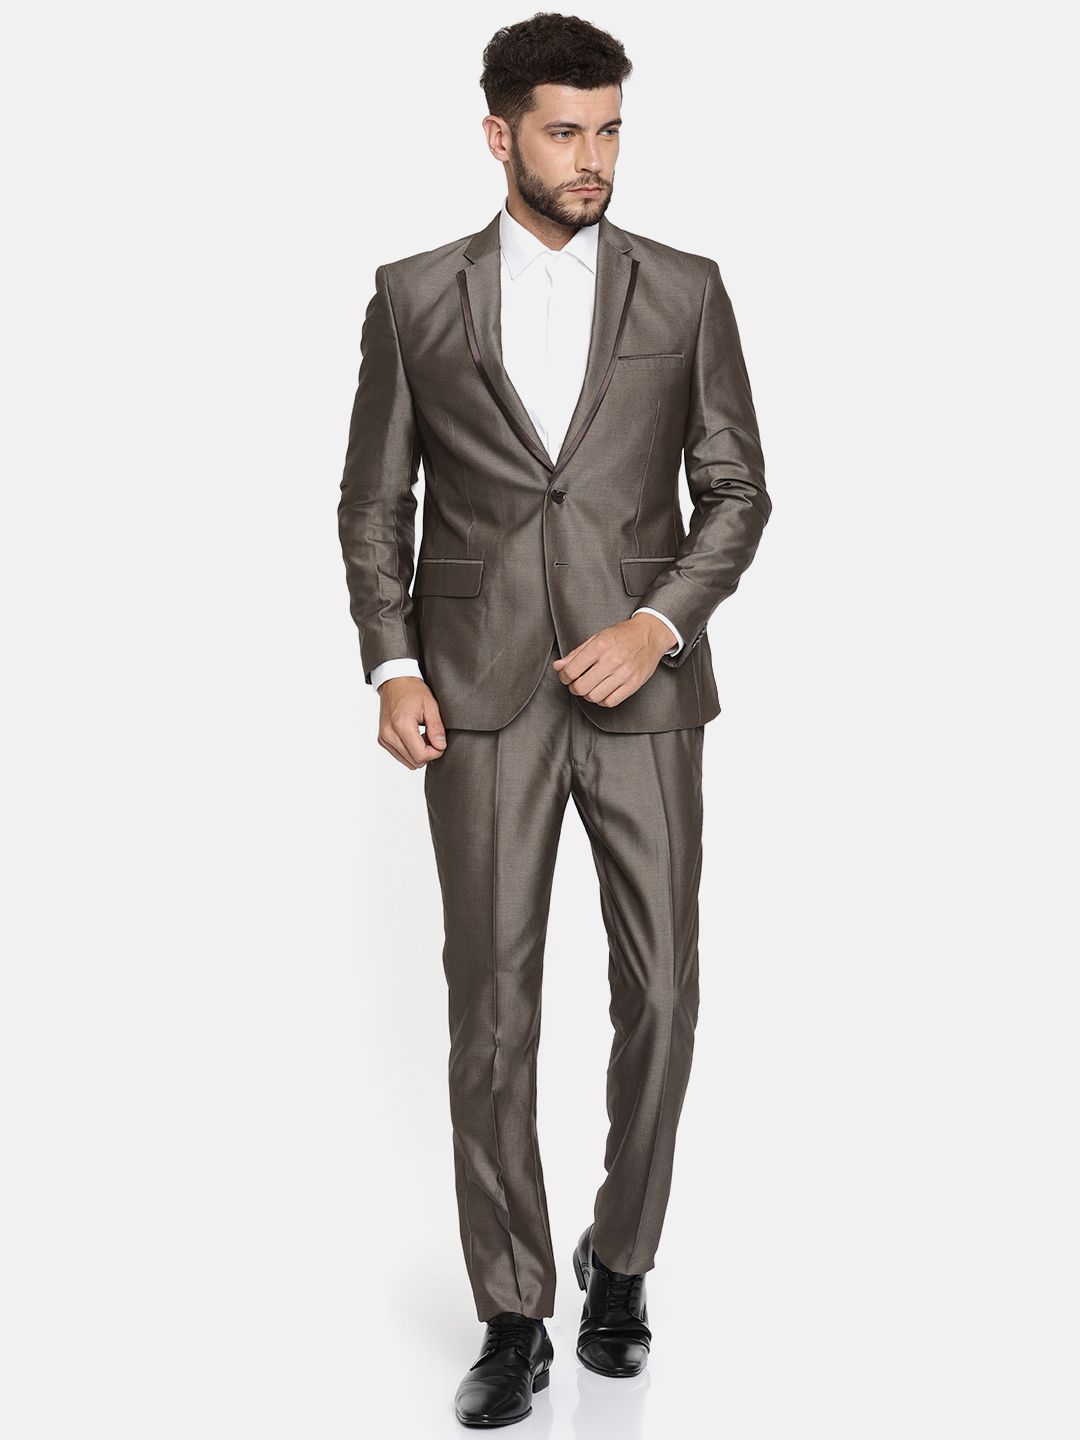 81c41a45-d1fb-41aa-b5eb-799e15fbe9771525935905592-Parx-Men-Brown-Solid-Urban-Fit-Single-Breasted-Formal-Suit-4001525935905378-1.jpg